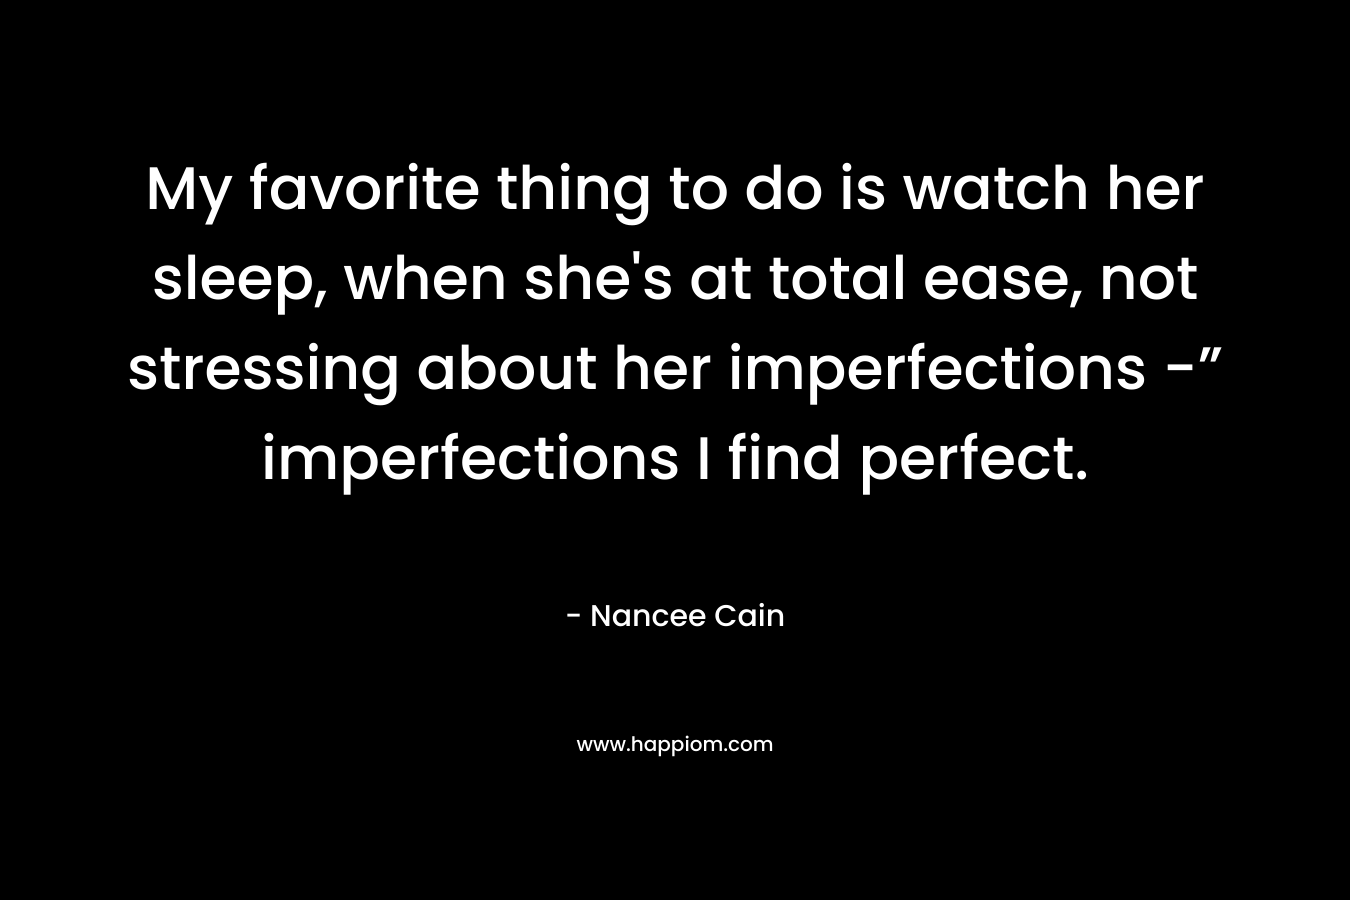 My favorite thing to do is watch her sleep, when she’s at total ease, not stressing about her imperfections -” imperfections I find perfect. – Nancee Cain